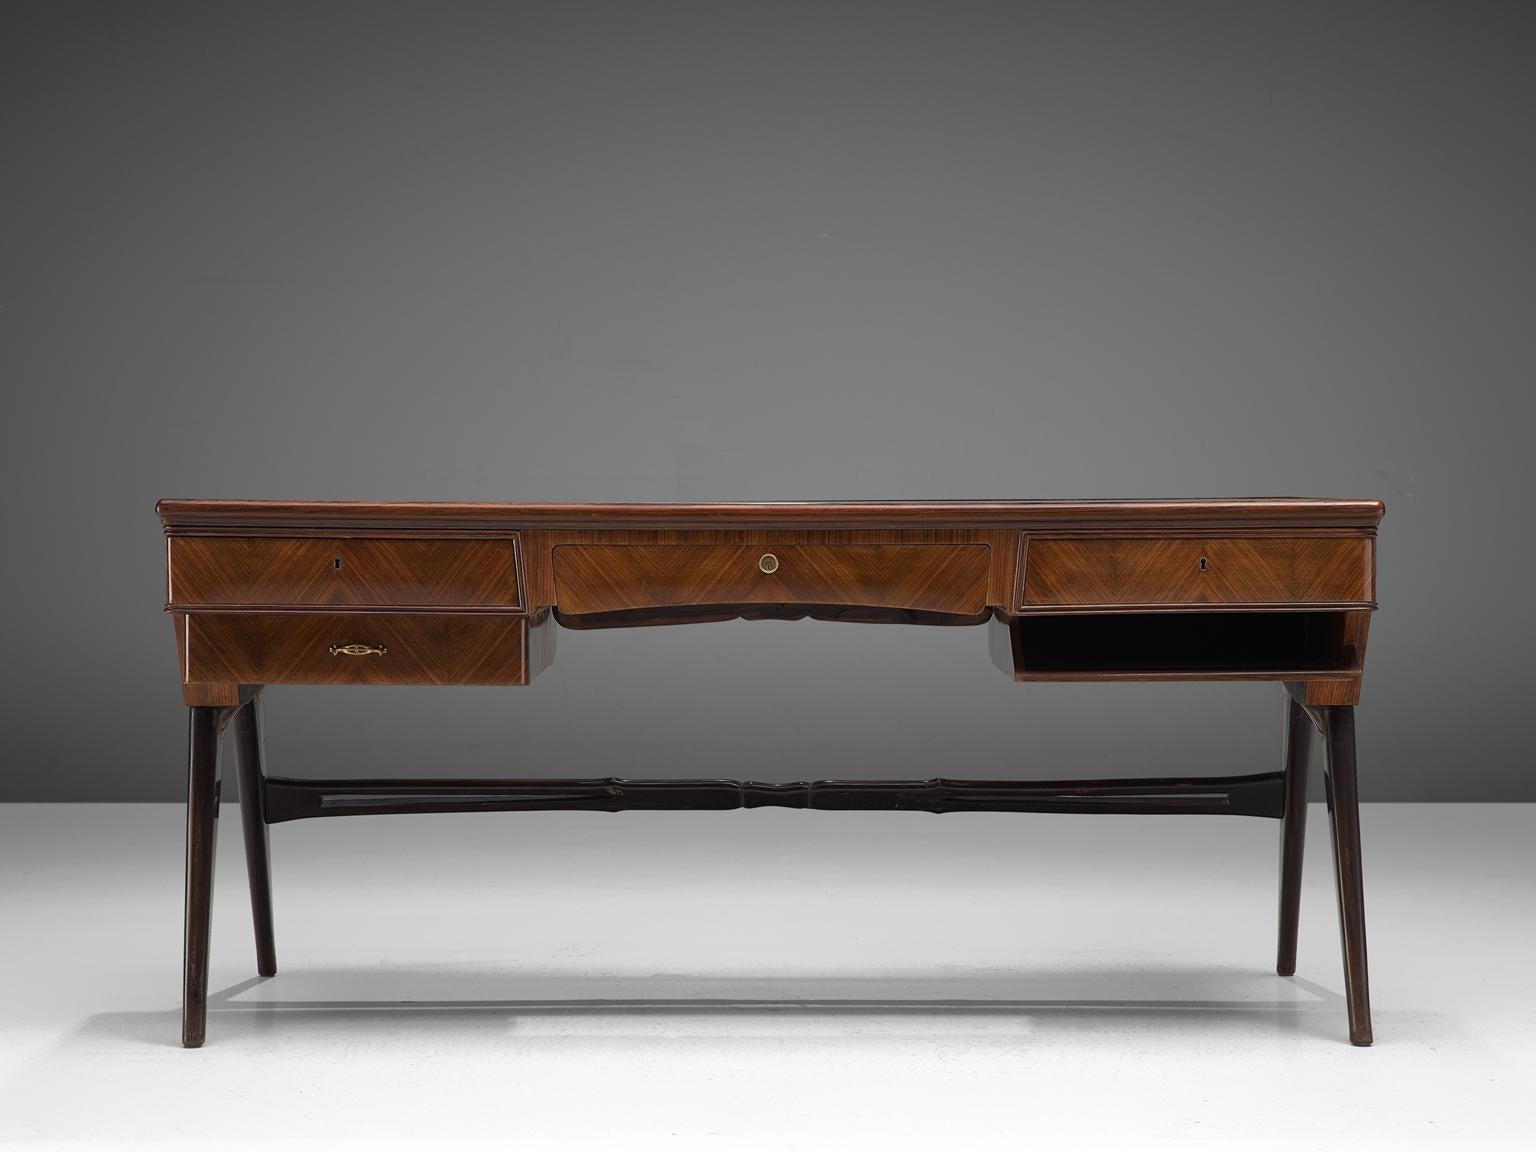 Desk, rosewood, glass, Italy, 1960s.

This desk is both refined and elegant in every way. The glass top stretches a little over the back of the solid, precisely crafted desk. This sculptural Italian piece is playful and airy. The brass feet finish